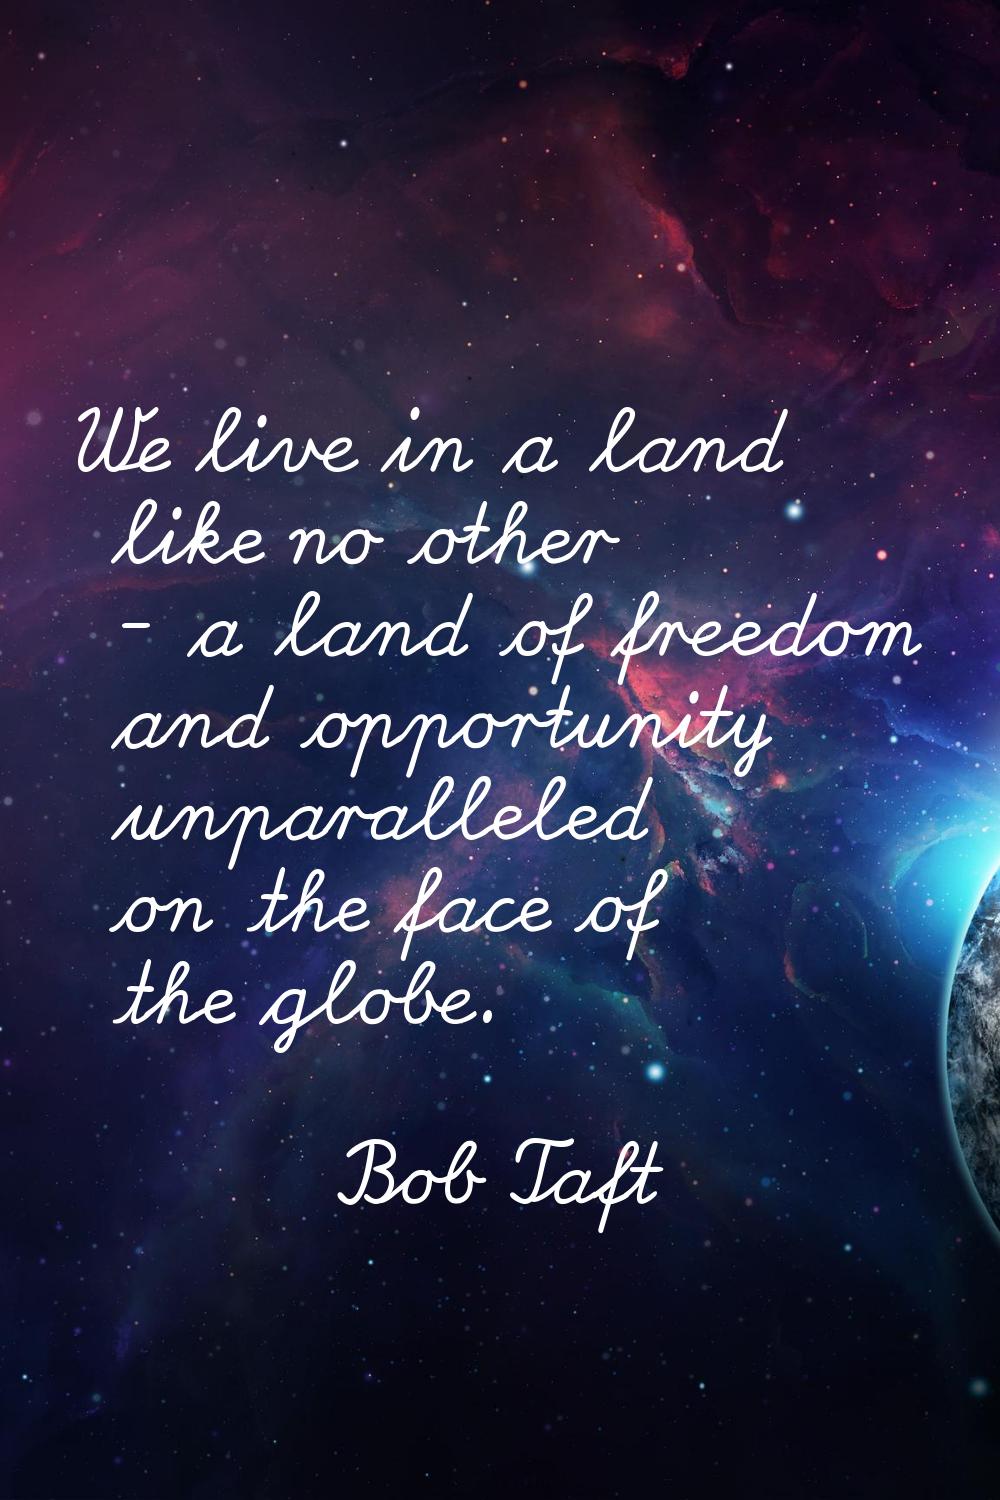 We live in a land like no other - a land of freedom and opportunity unparalleled on the face of the